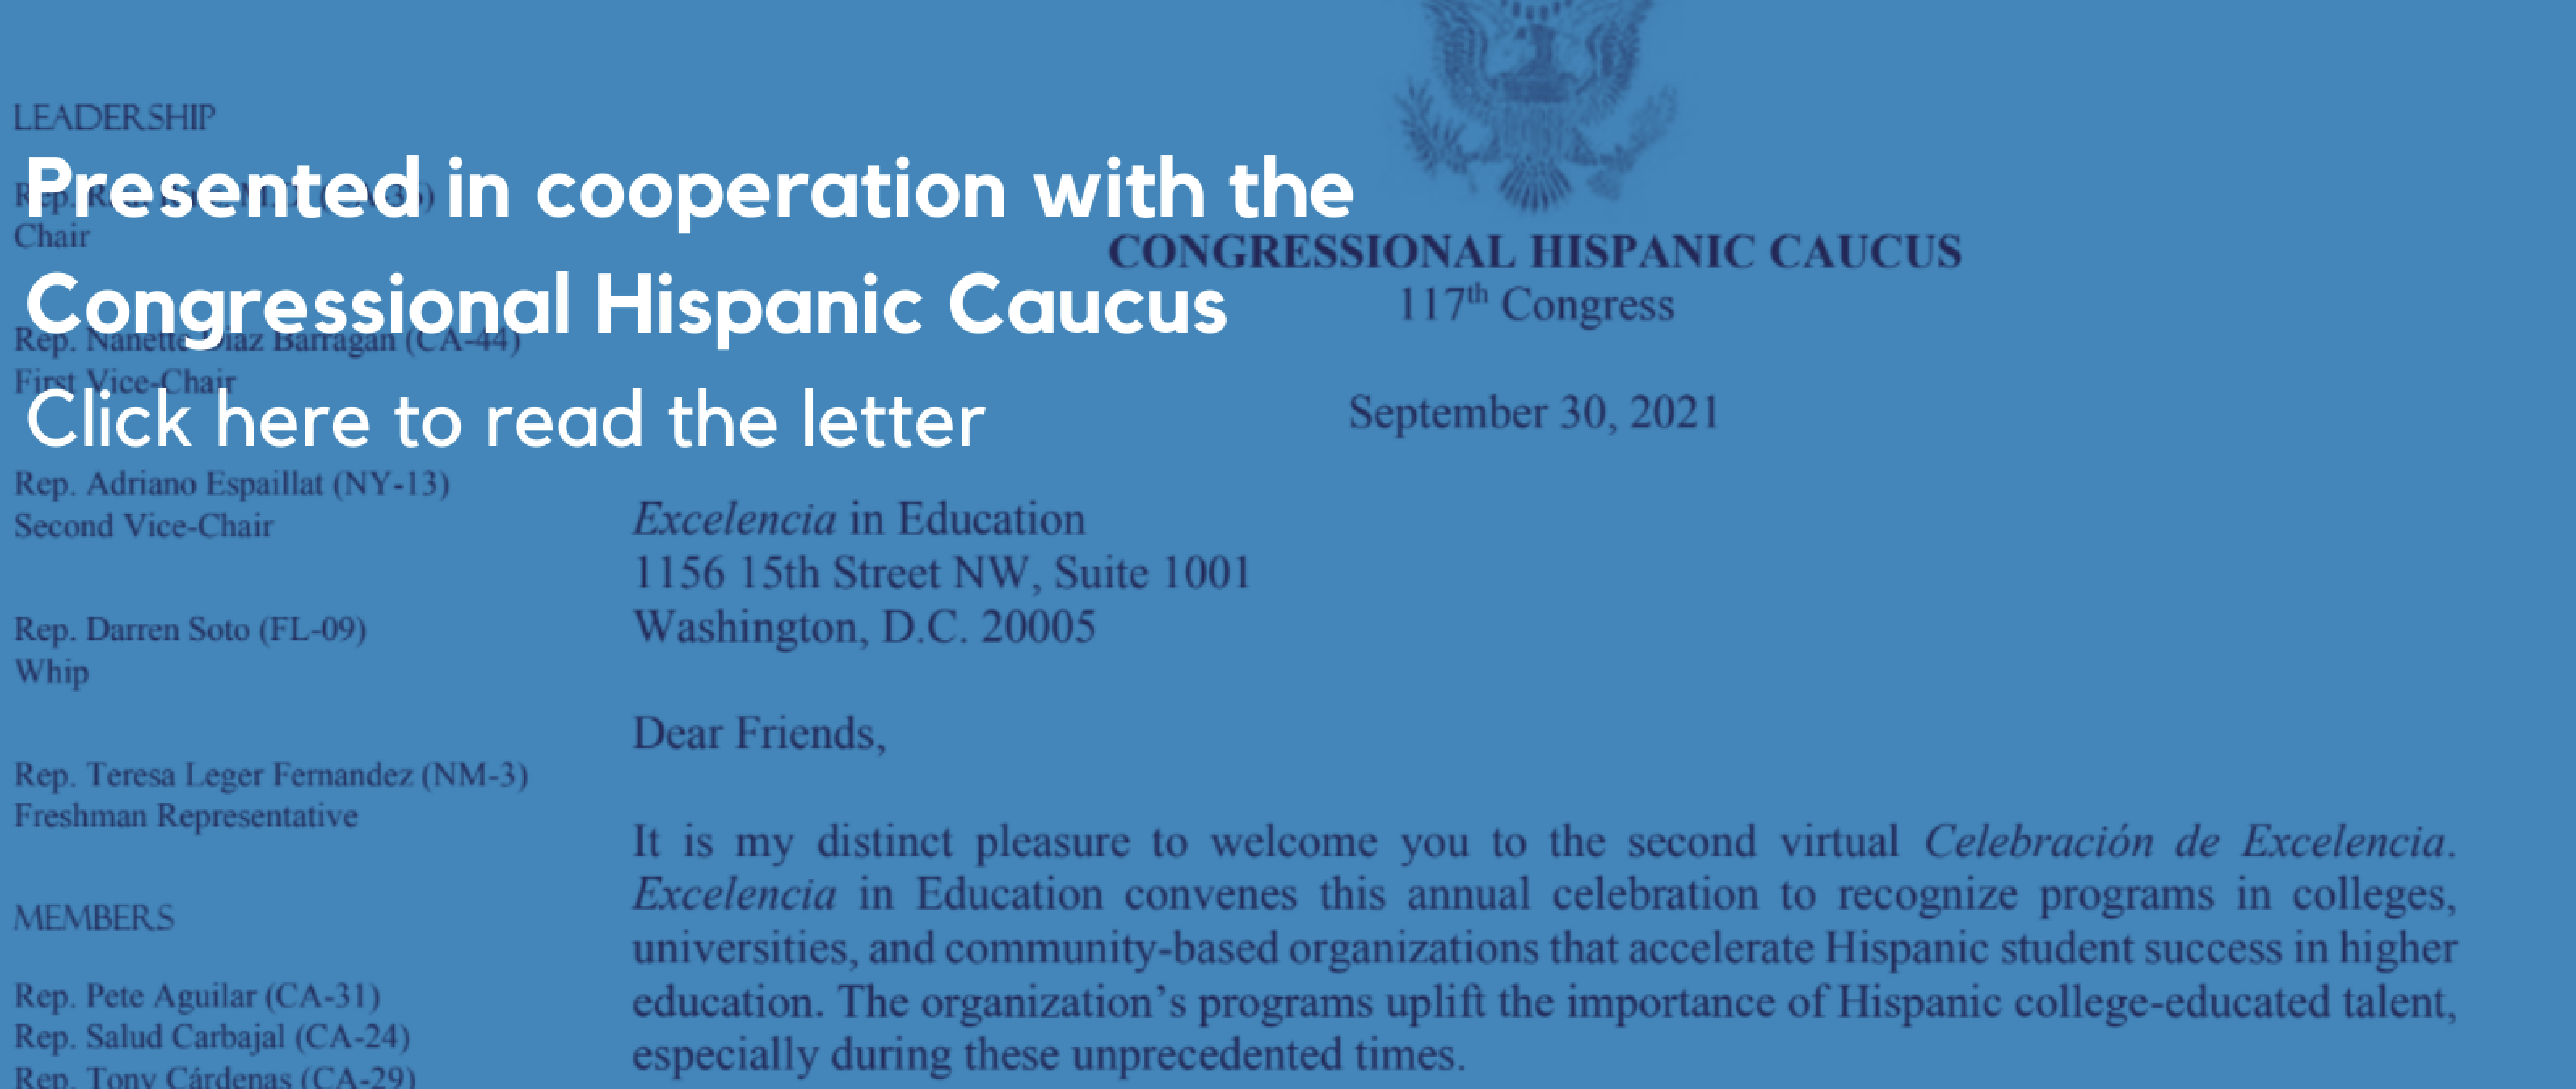 Image-Letter from Congressional Hispanic Caucus to Excelencia in Education for Celebracion de Excelencia 2021